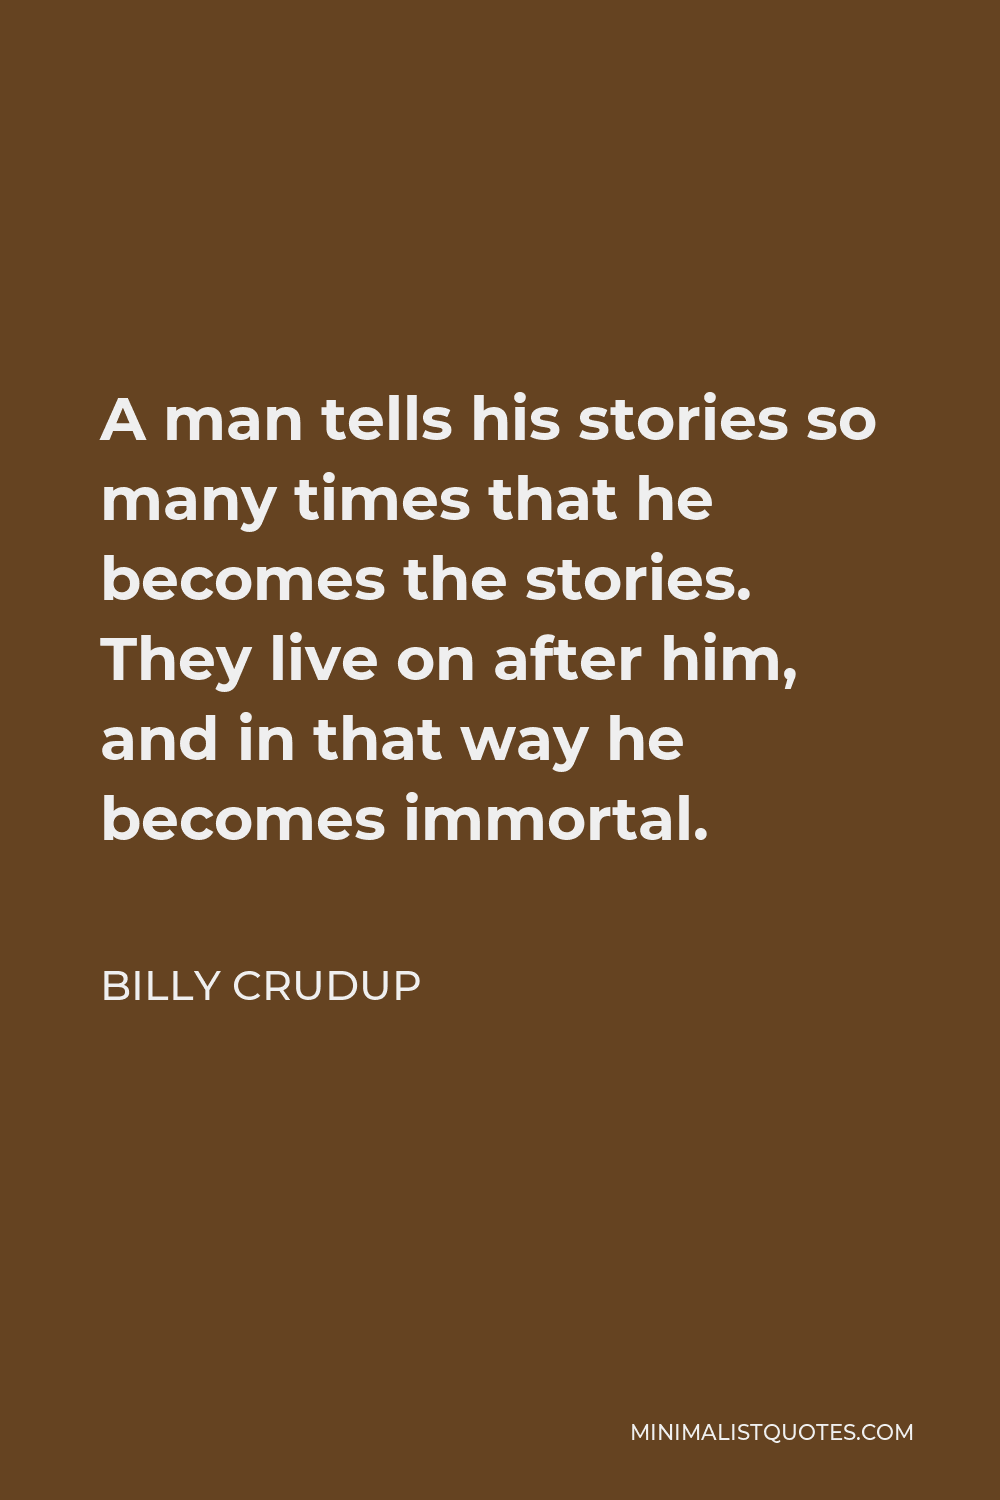 Billy Crudup Quote - A man tells his stories so many times that he becomes the stories. They live on after him, and in that way he becomes immortal.